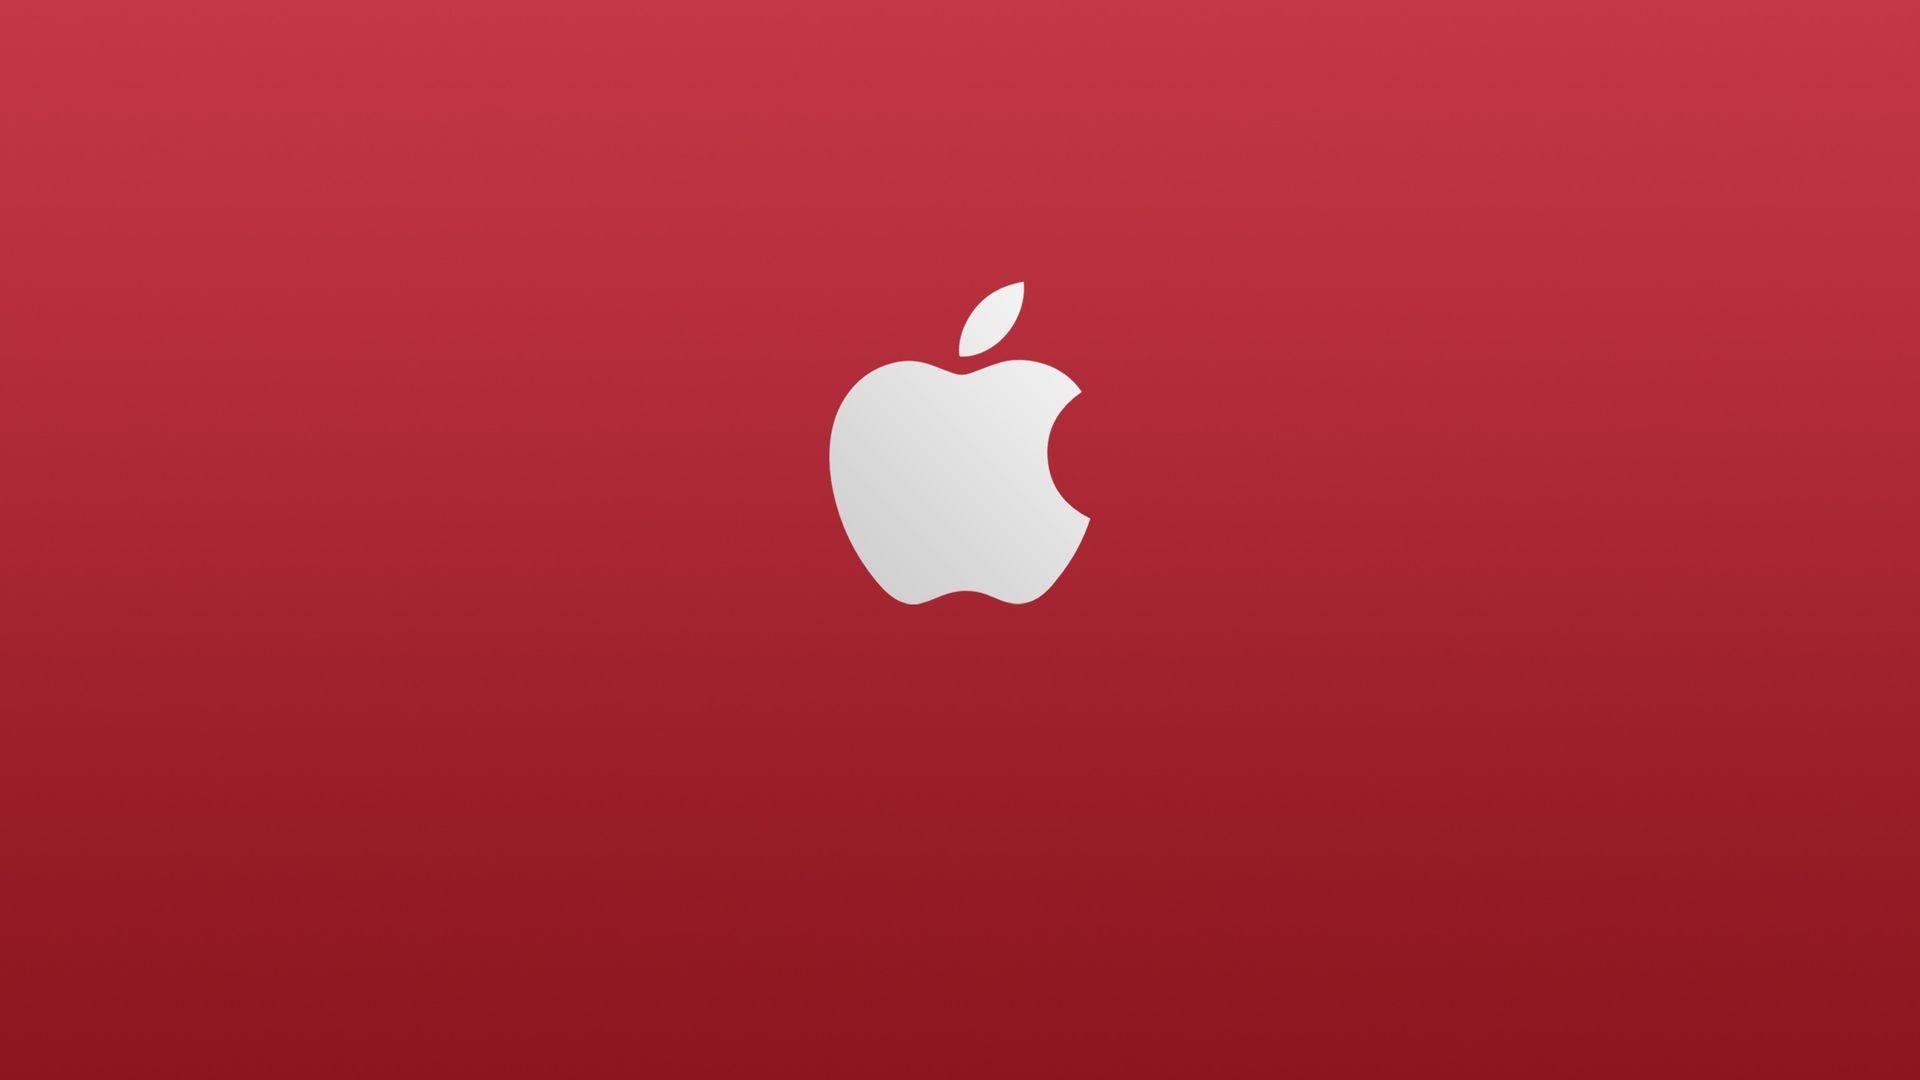 Red Background and White Apple Logo HD Wallpaper